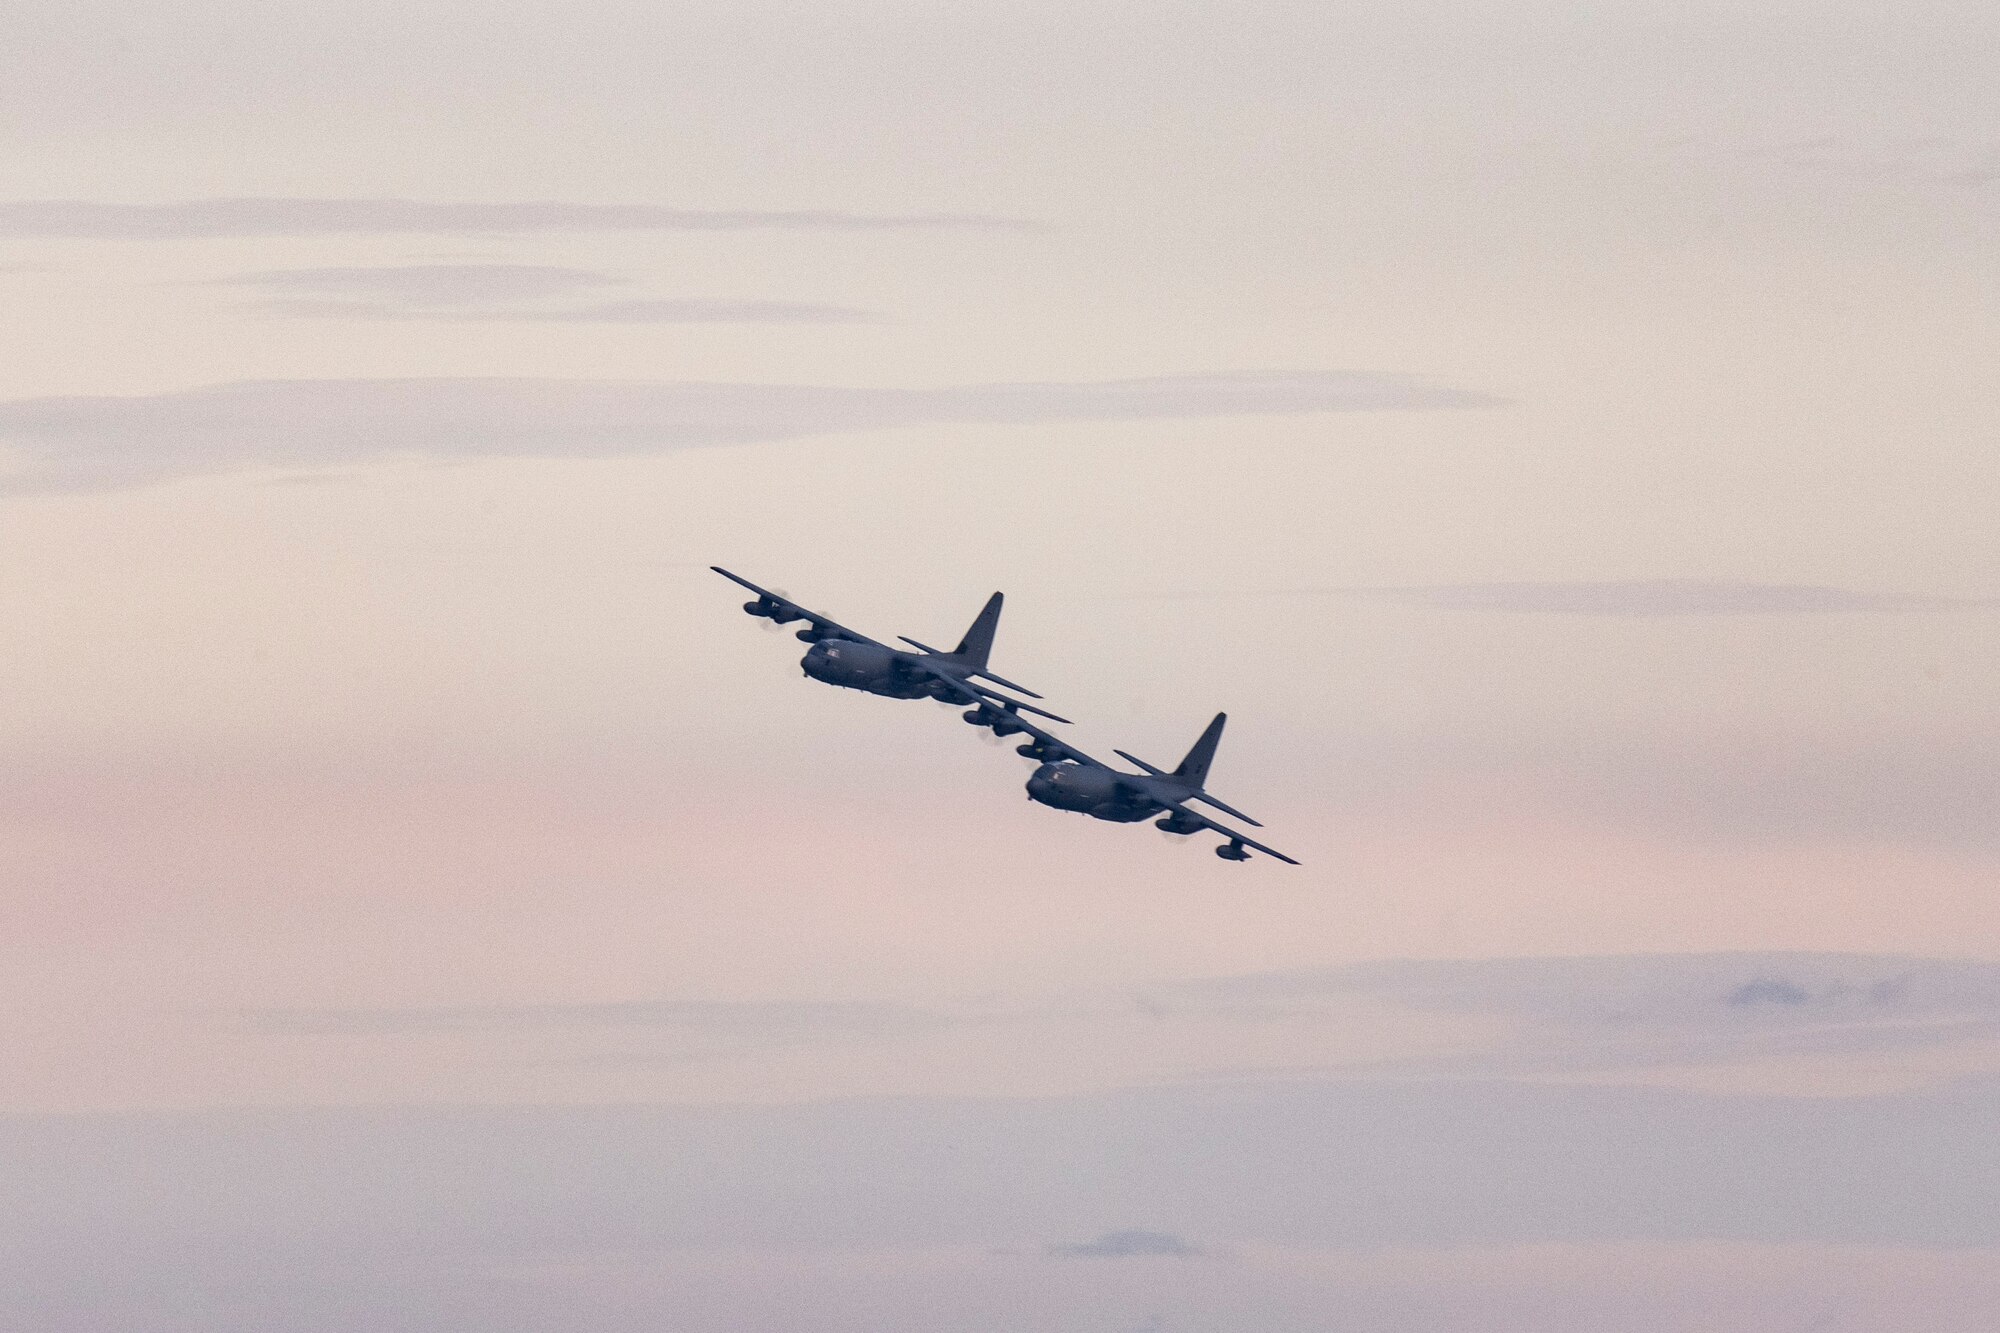 Two MC-130J Commando II aircraft from the 1st Special Operations Wing take off from Hurlburt Field, Florida, Jul. 6, 2023. The 1st Special Operation Wing, especially postured for rapid intervention in any crisis or conflict, launched two MC-130Js in support of U.S. Southern Command to enhance collective readiness, capability and contribute to regional security in the Western Hemisphere